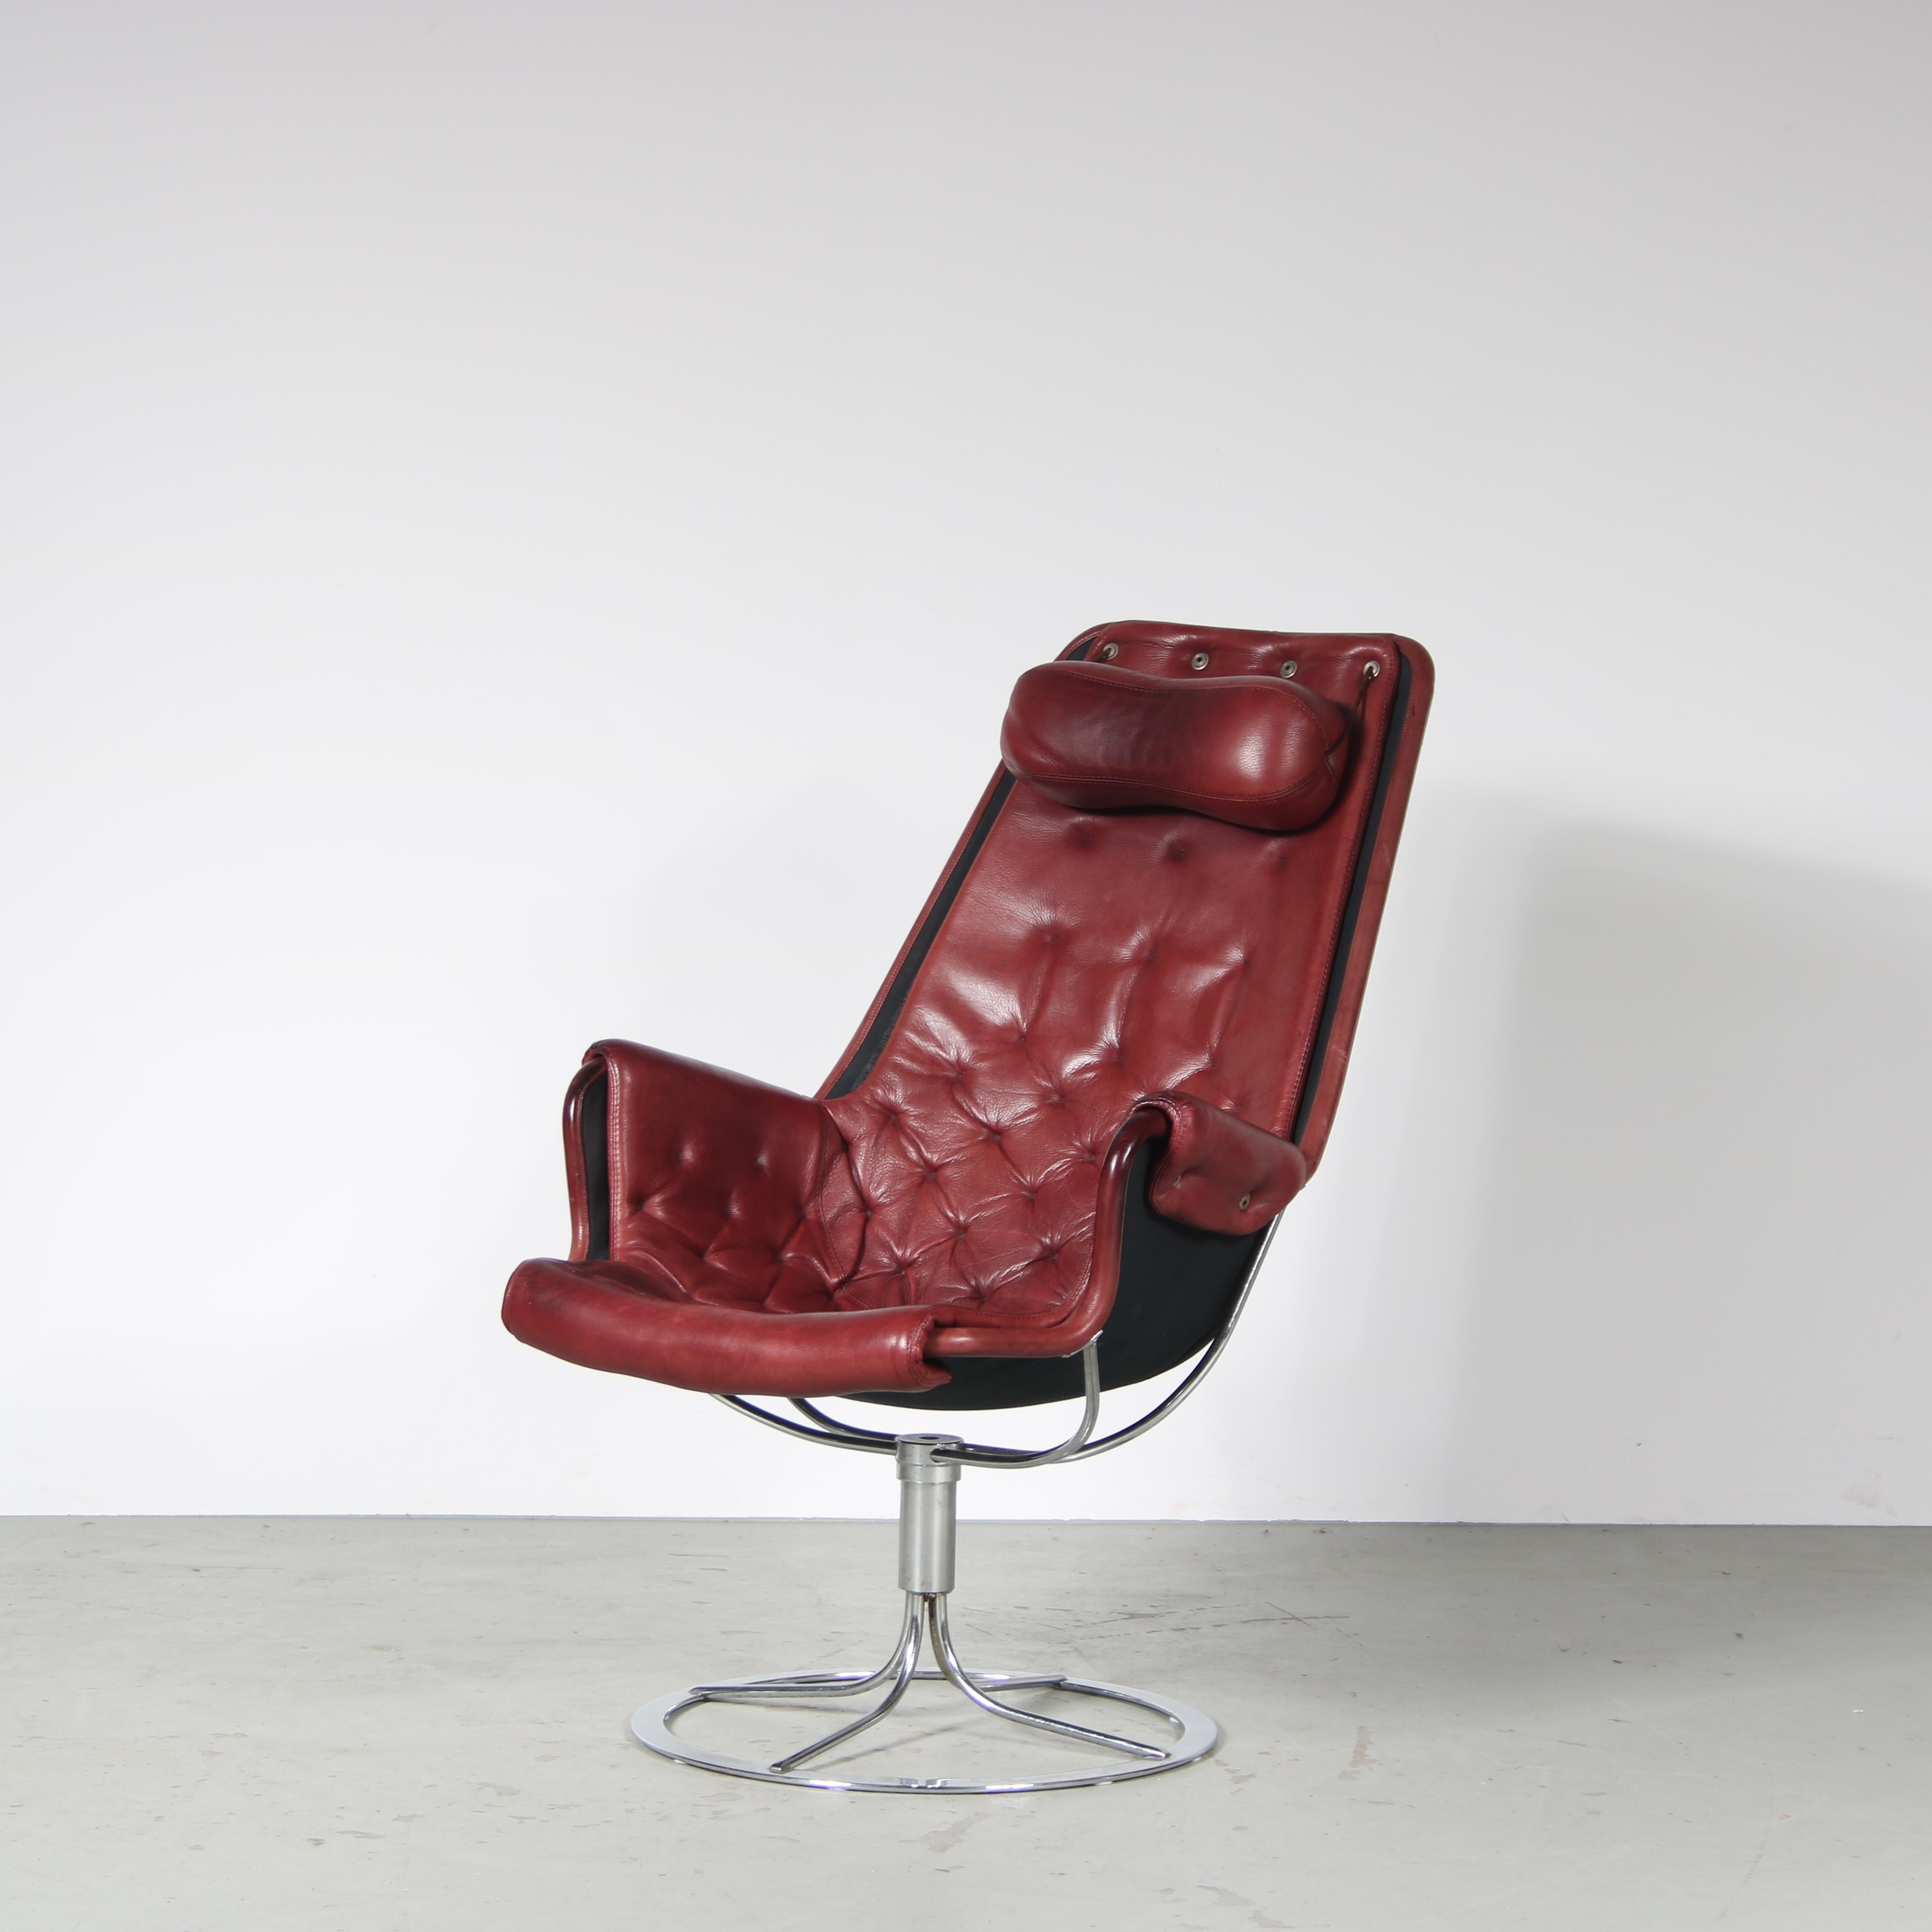 A highly recognizable “Jetson” chair designed by Bruno Mathsson and manufactured by DUX in Sweden around 1960.

Resting on a round foot and elegantly curved chrome plated metal base, the seat holds a wine red leather upholstery and canvas support.